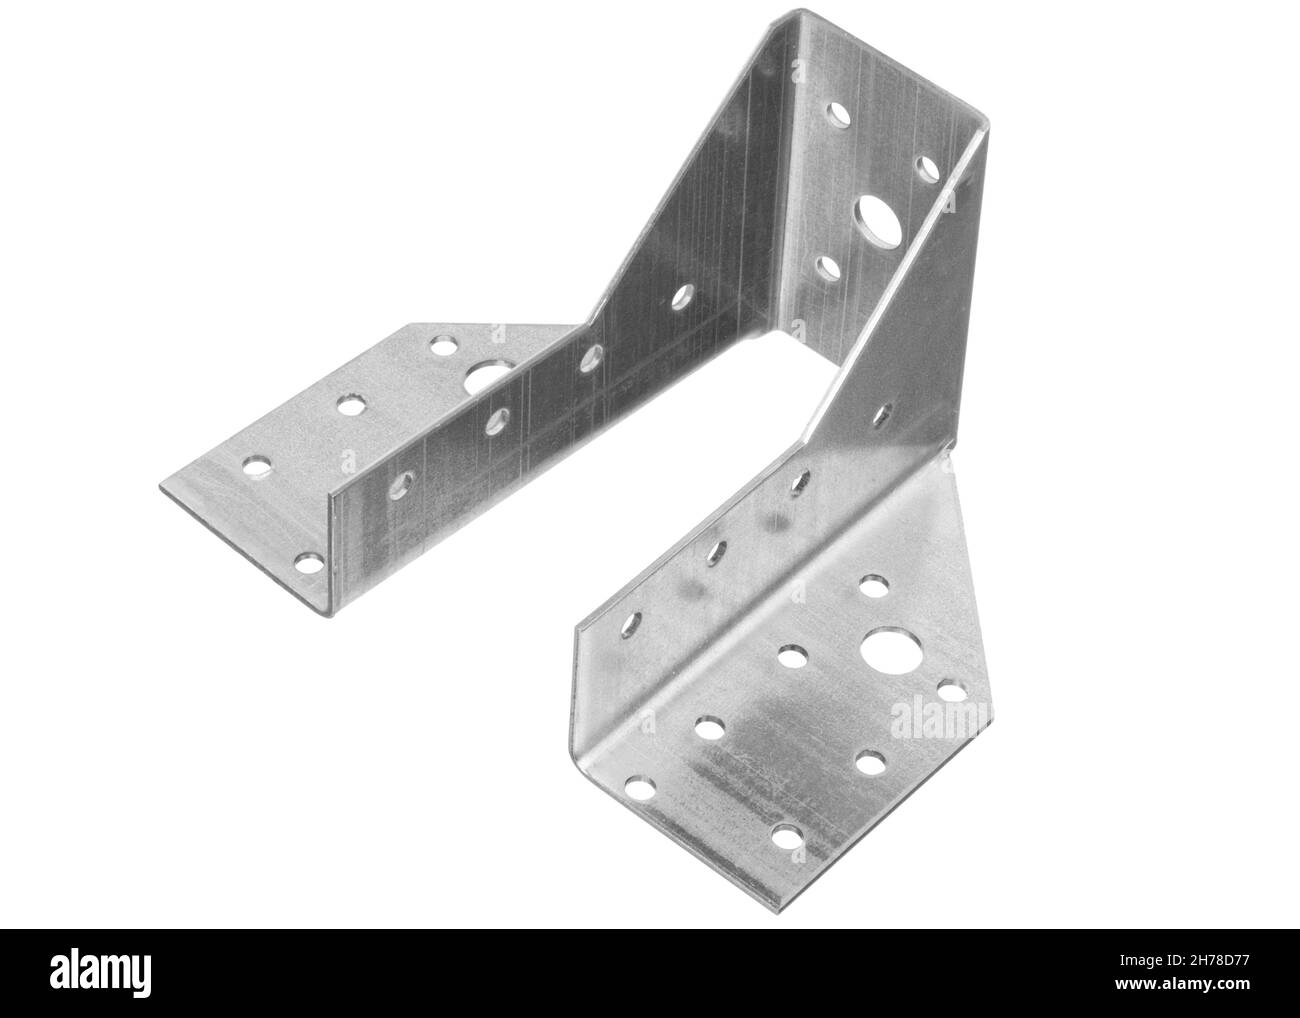 Stainless steel metal fixing angle isolated on white background. The metal corner is used in construction for the installation of various parts. Stock Photo